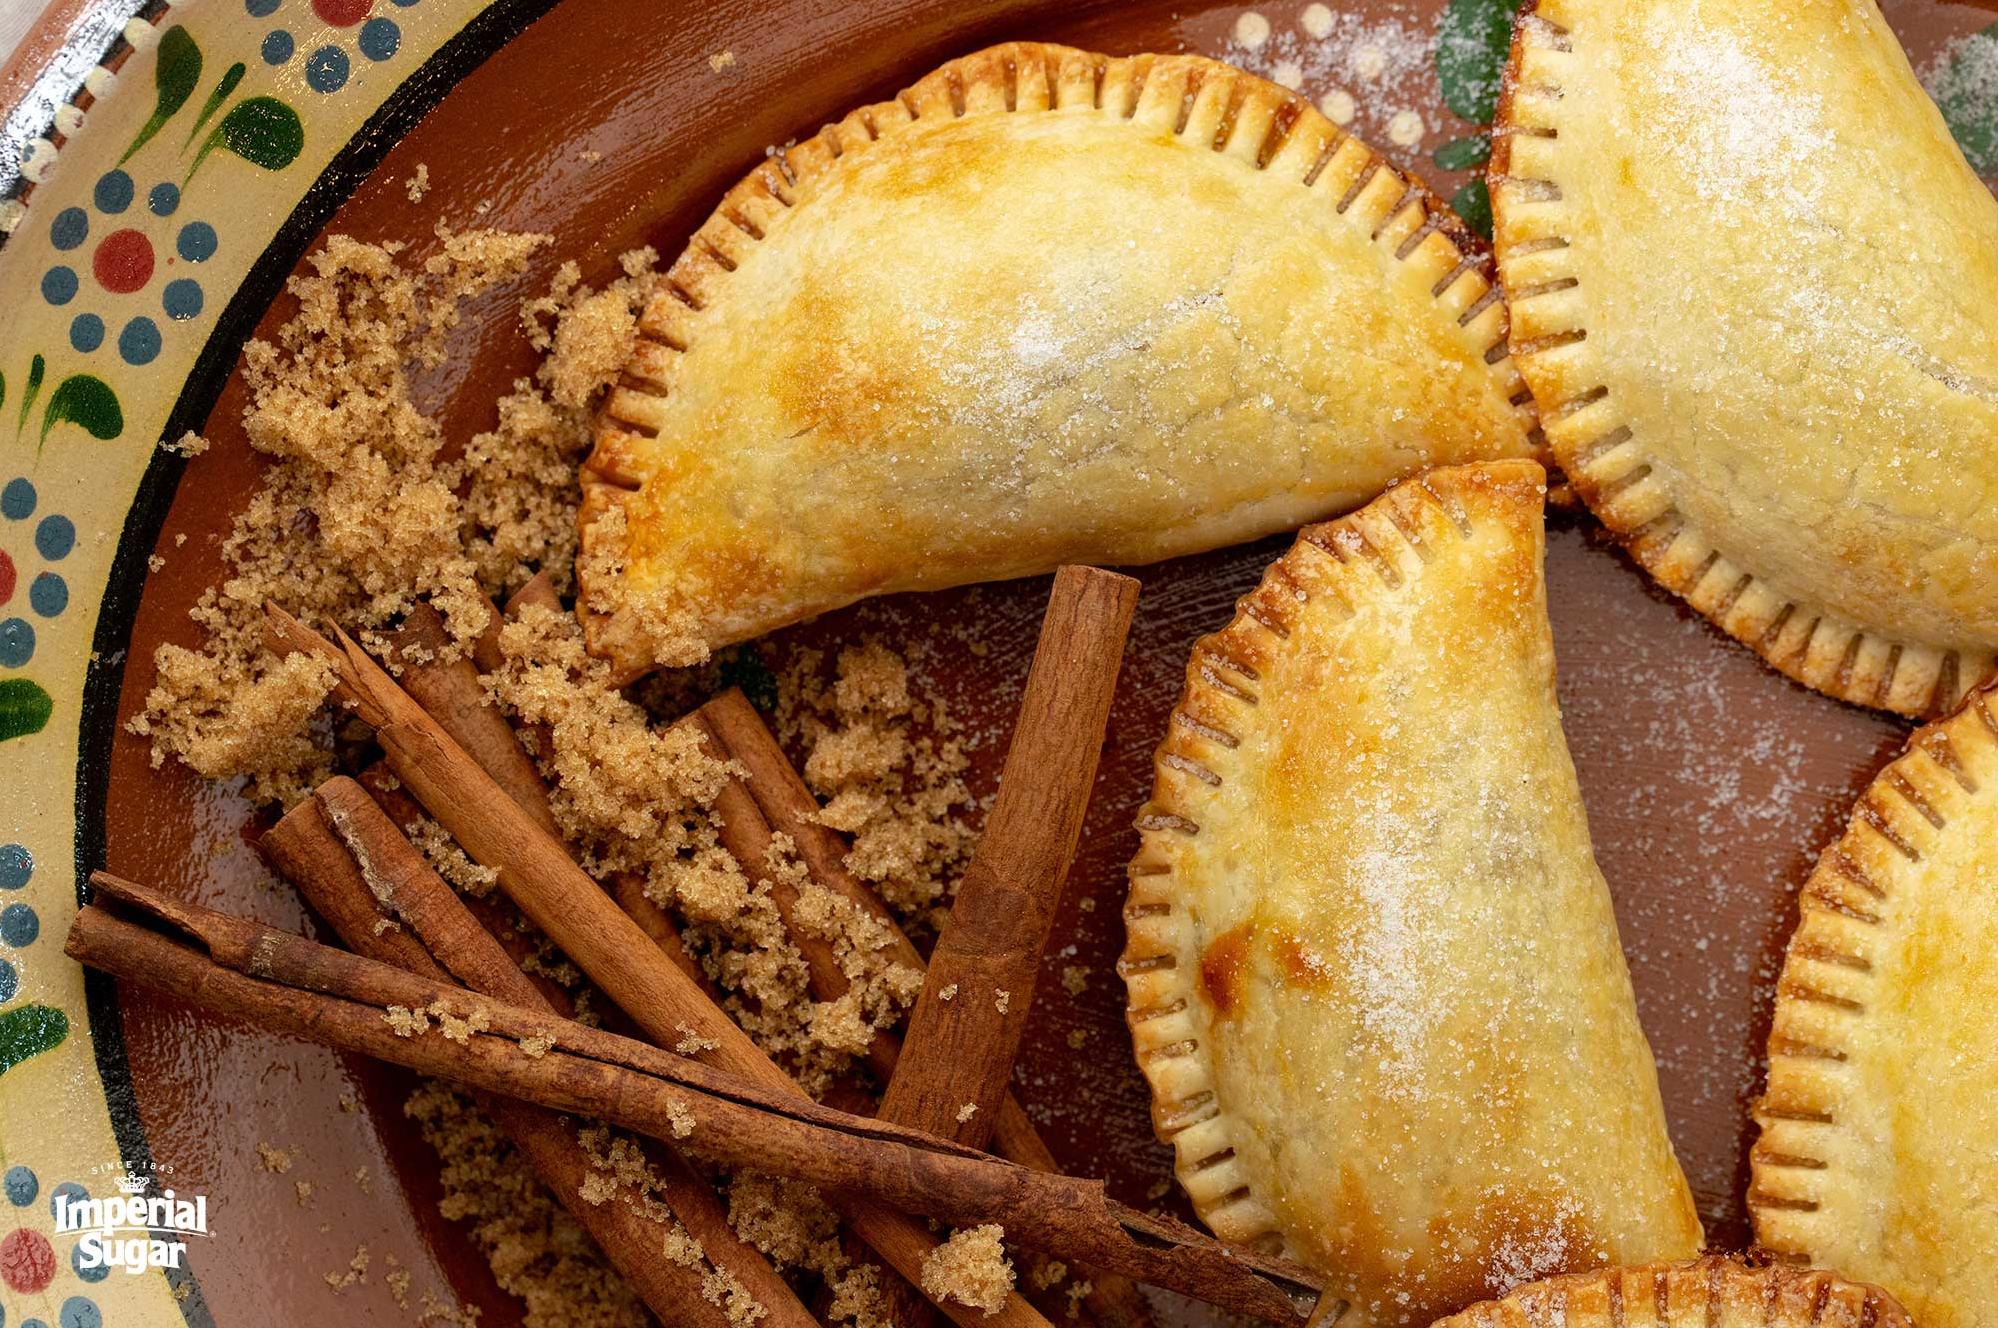  Welcome to the pumpkin patch-- these empanadas are the main attraction!